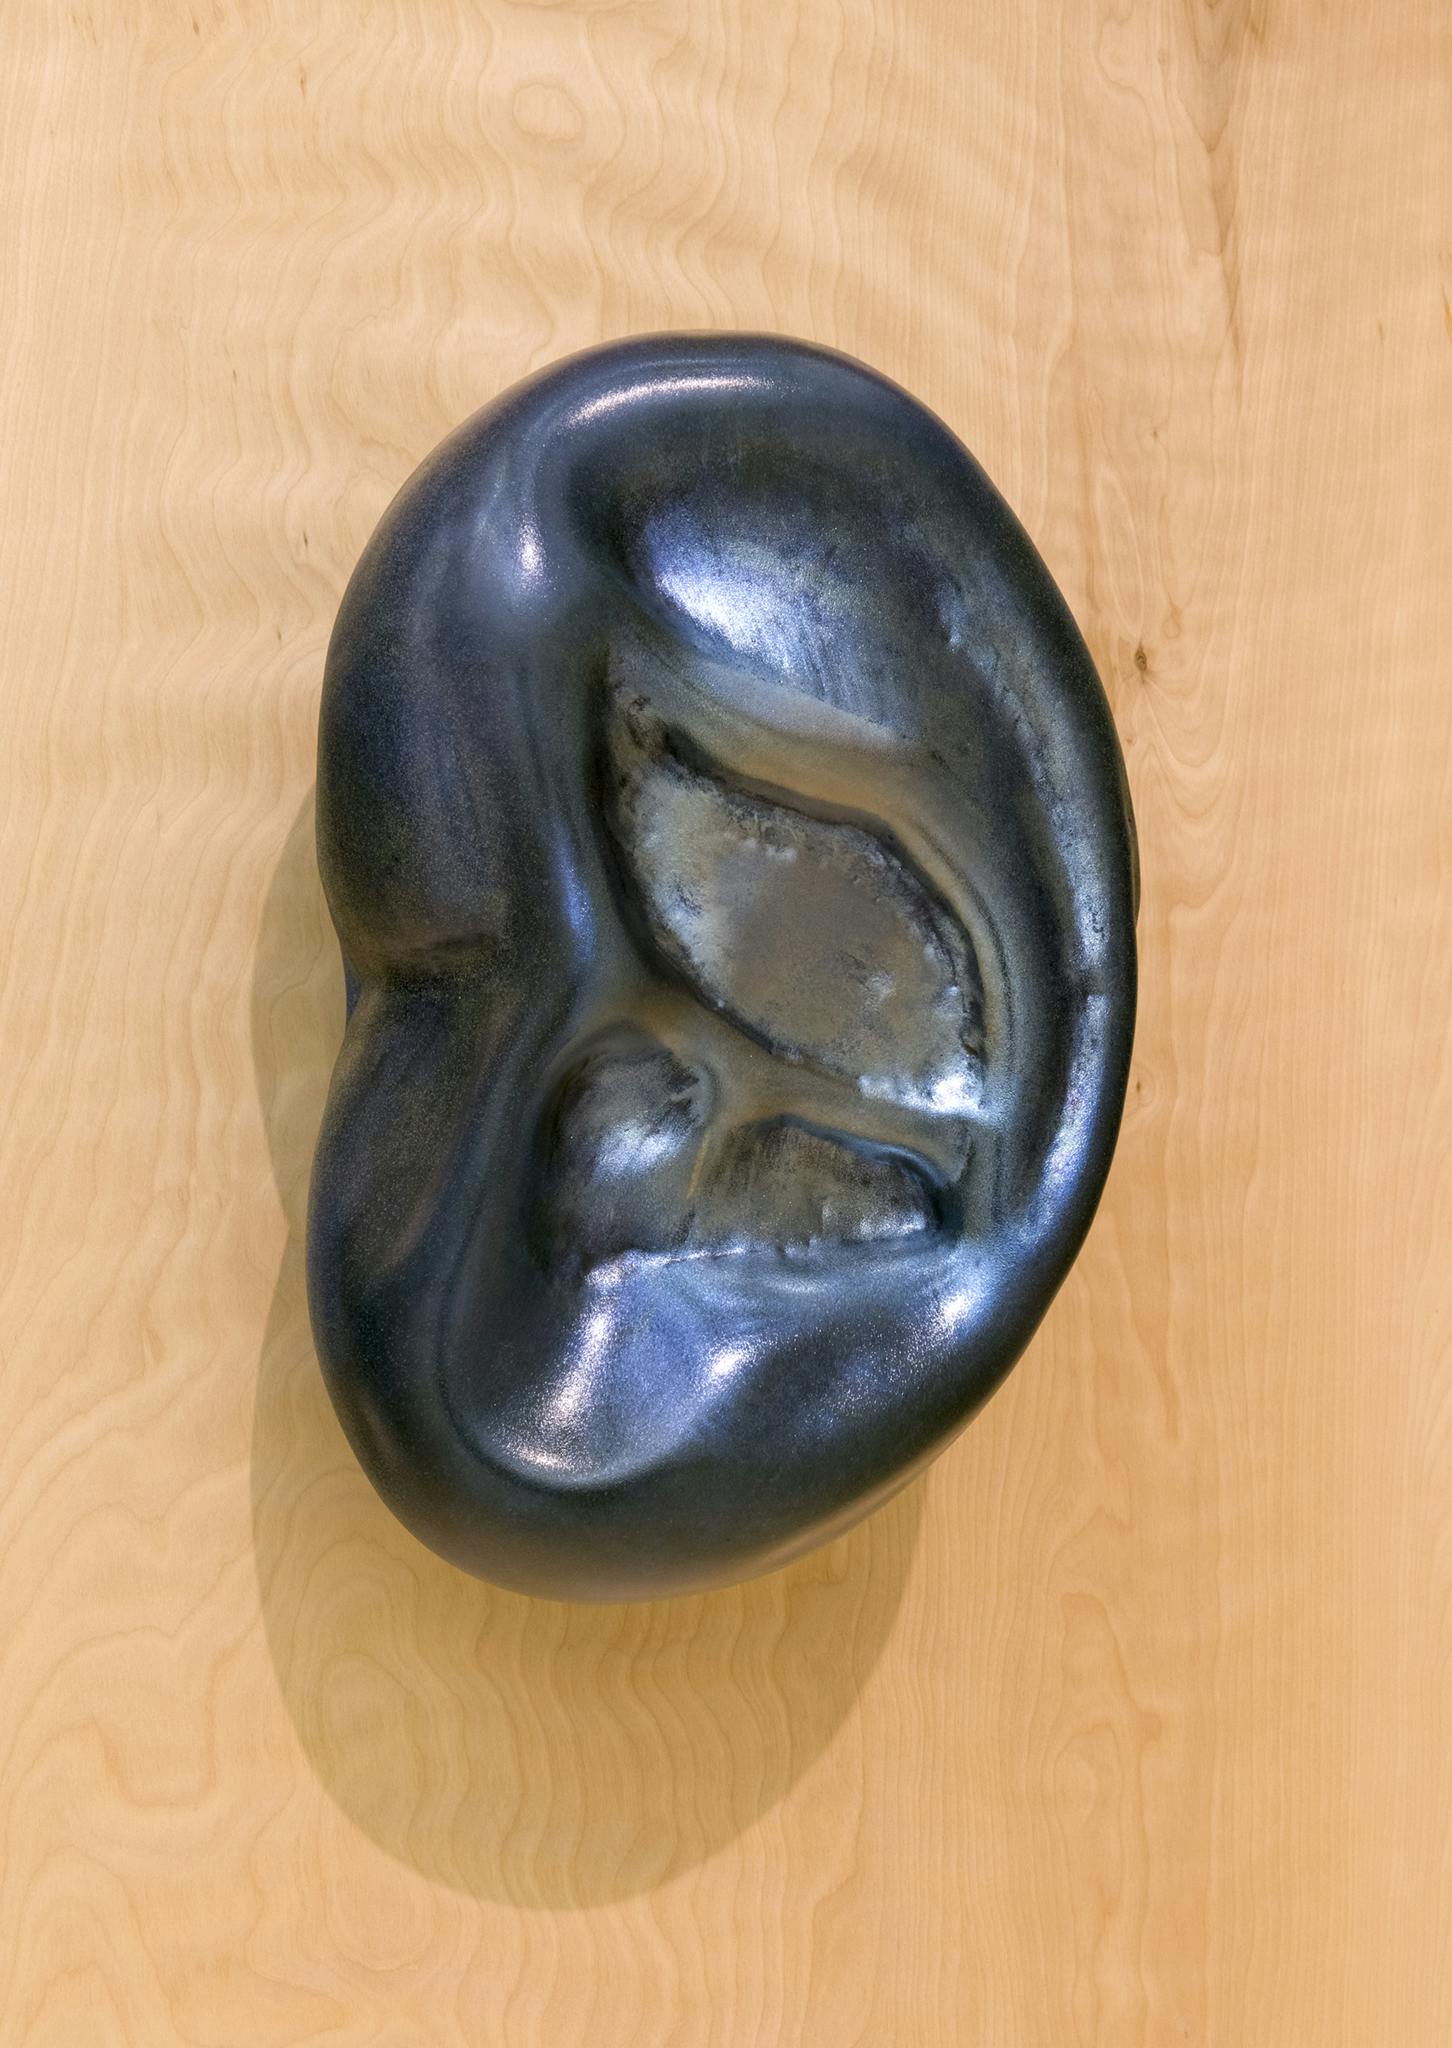 Image of a dark, metallic coloured sculpture on a wooden surface. The sculpture resembles the form of a human ear. 